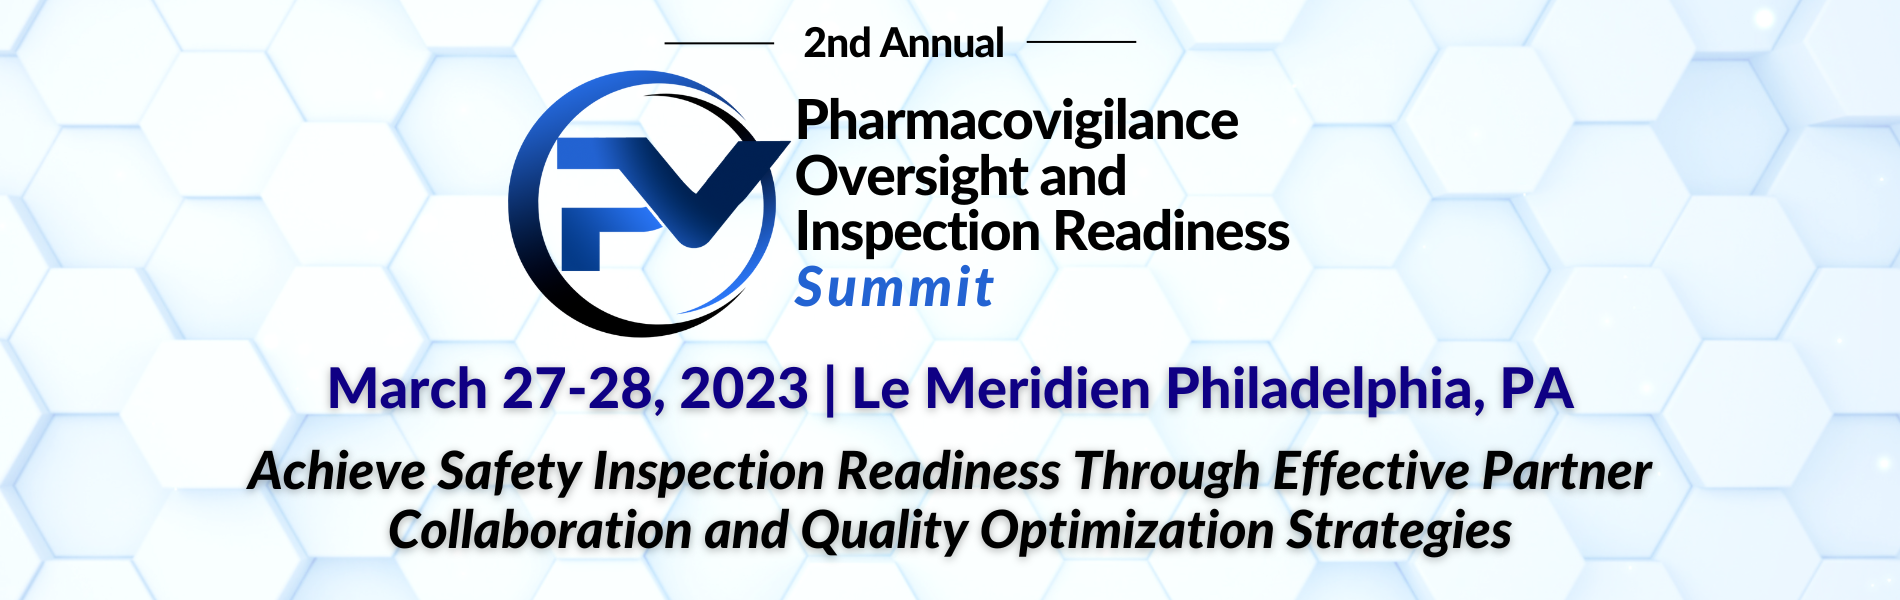 Banner of 2nd Pharmacovigilance Oversight and Inspection Readiness Summit, , March 27-28, 2023 - Le Meridien Philadelphia, PA, Achieve Safety Inspection Readiness Through Effective Partner Collaboration and Quality Optimization Strategies